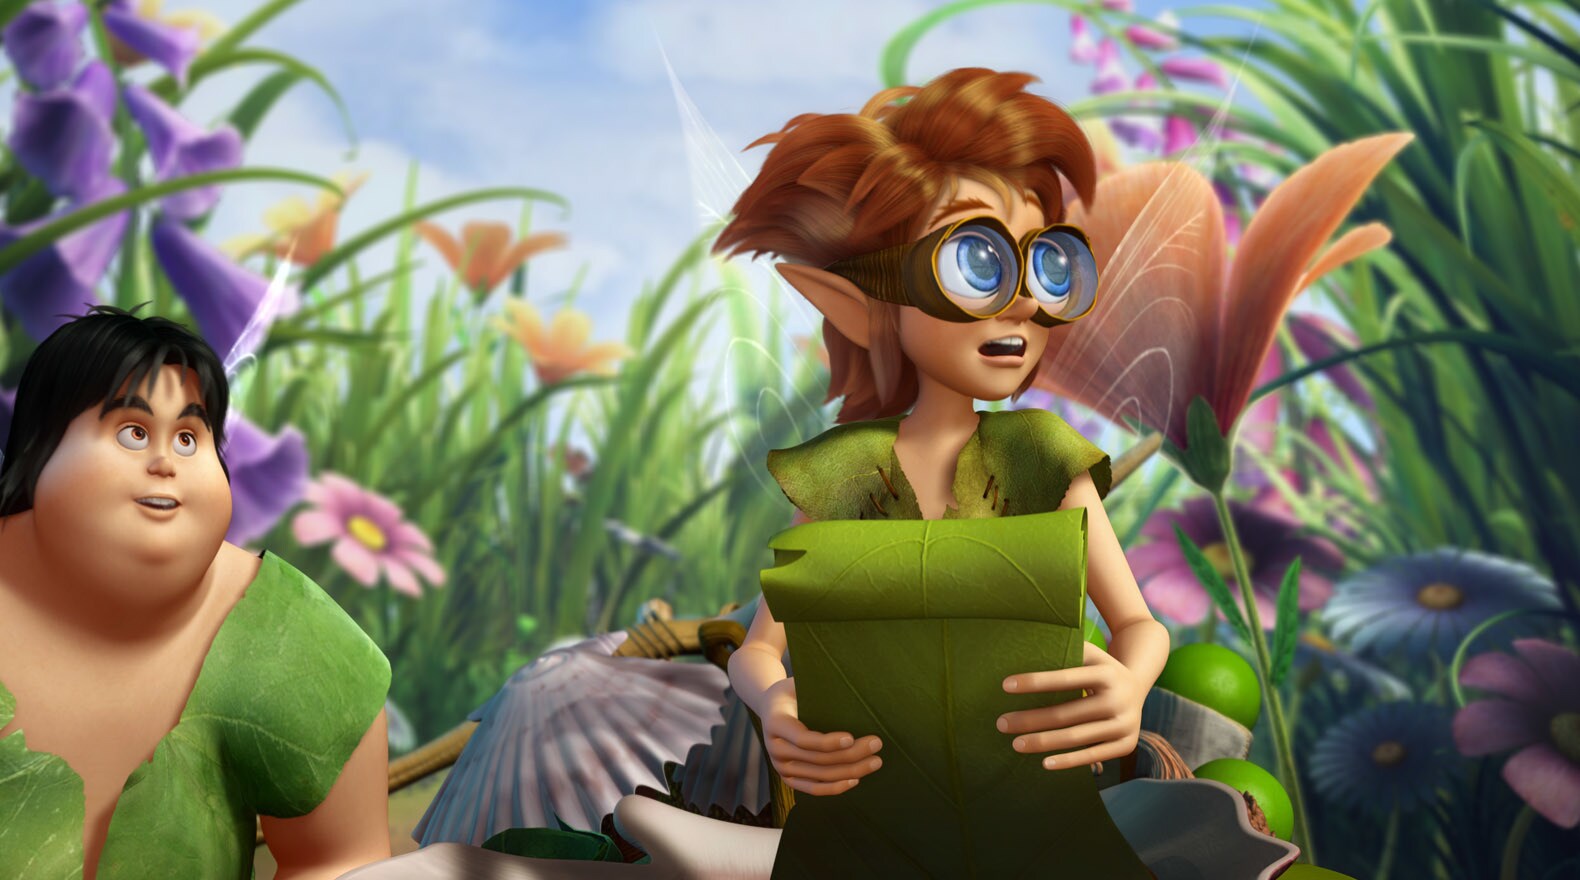 Clank and Bobble are off to show the other fairies what new tools they have for spring.